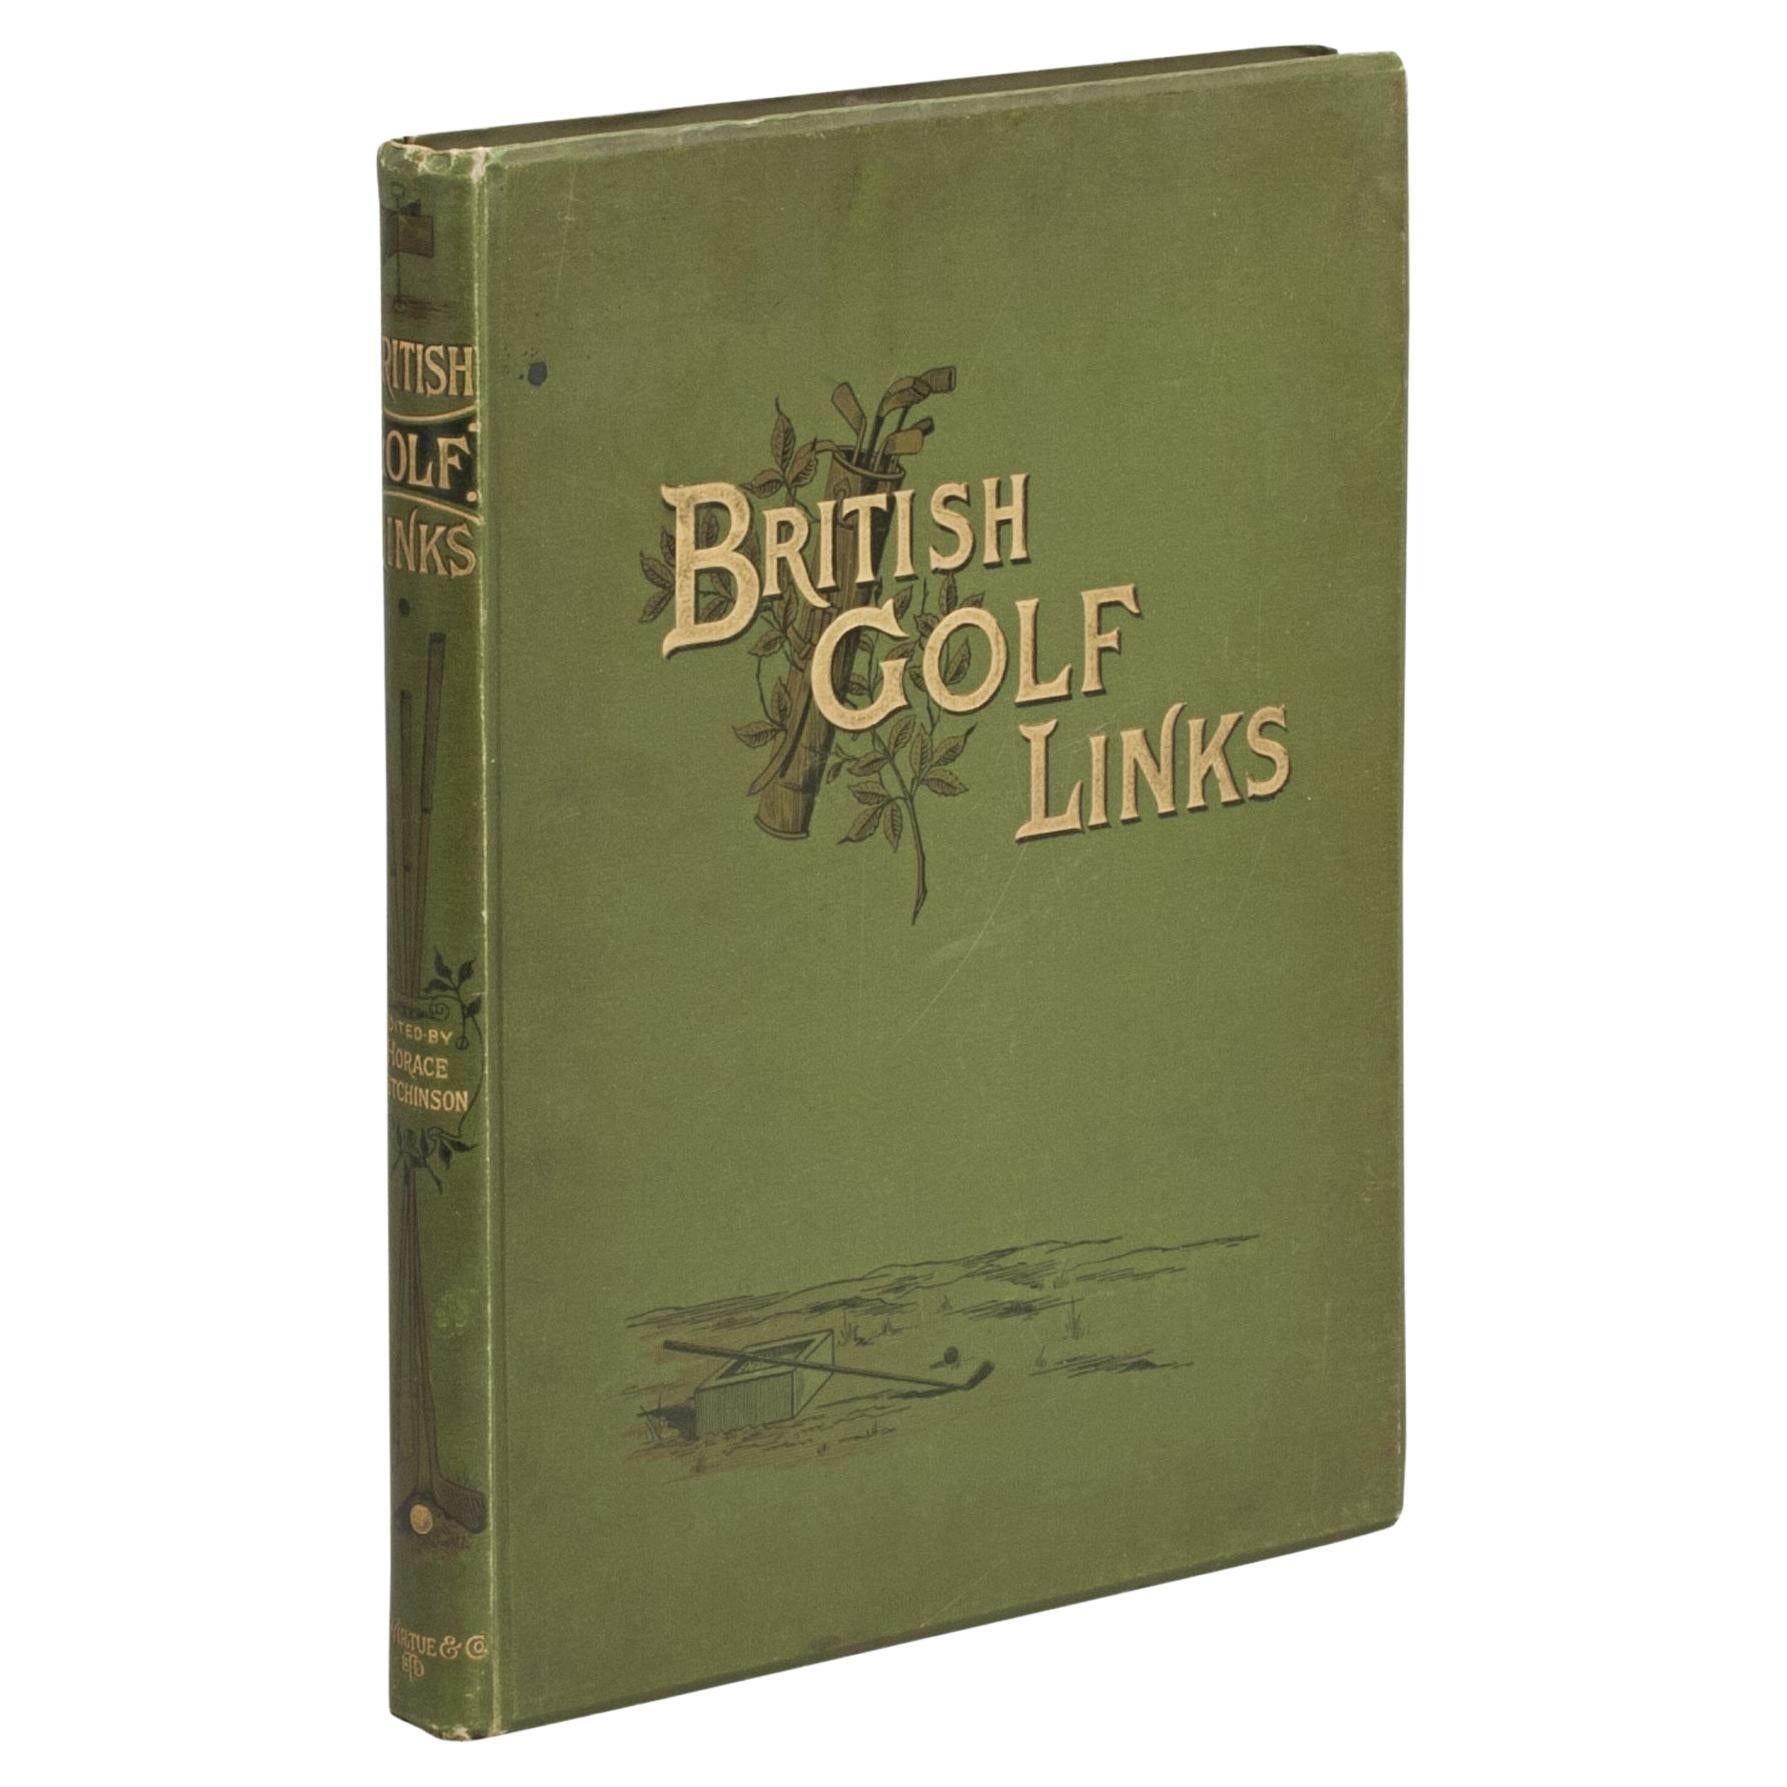 Golf Book, British Golf Links by Horace Hutchinson